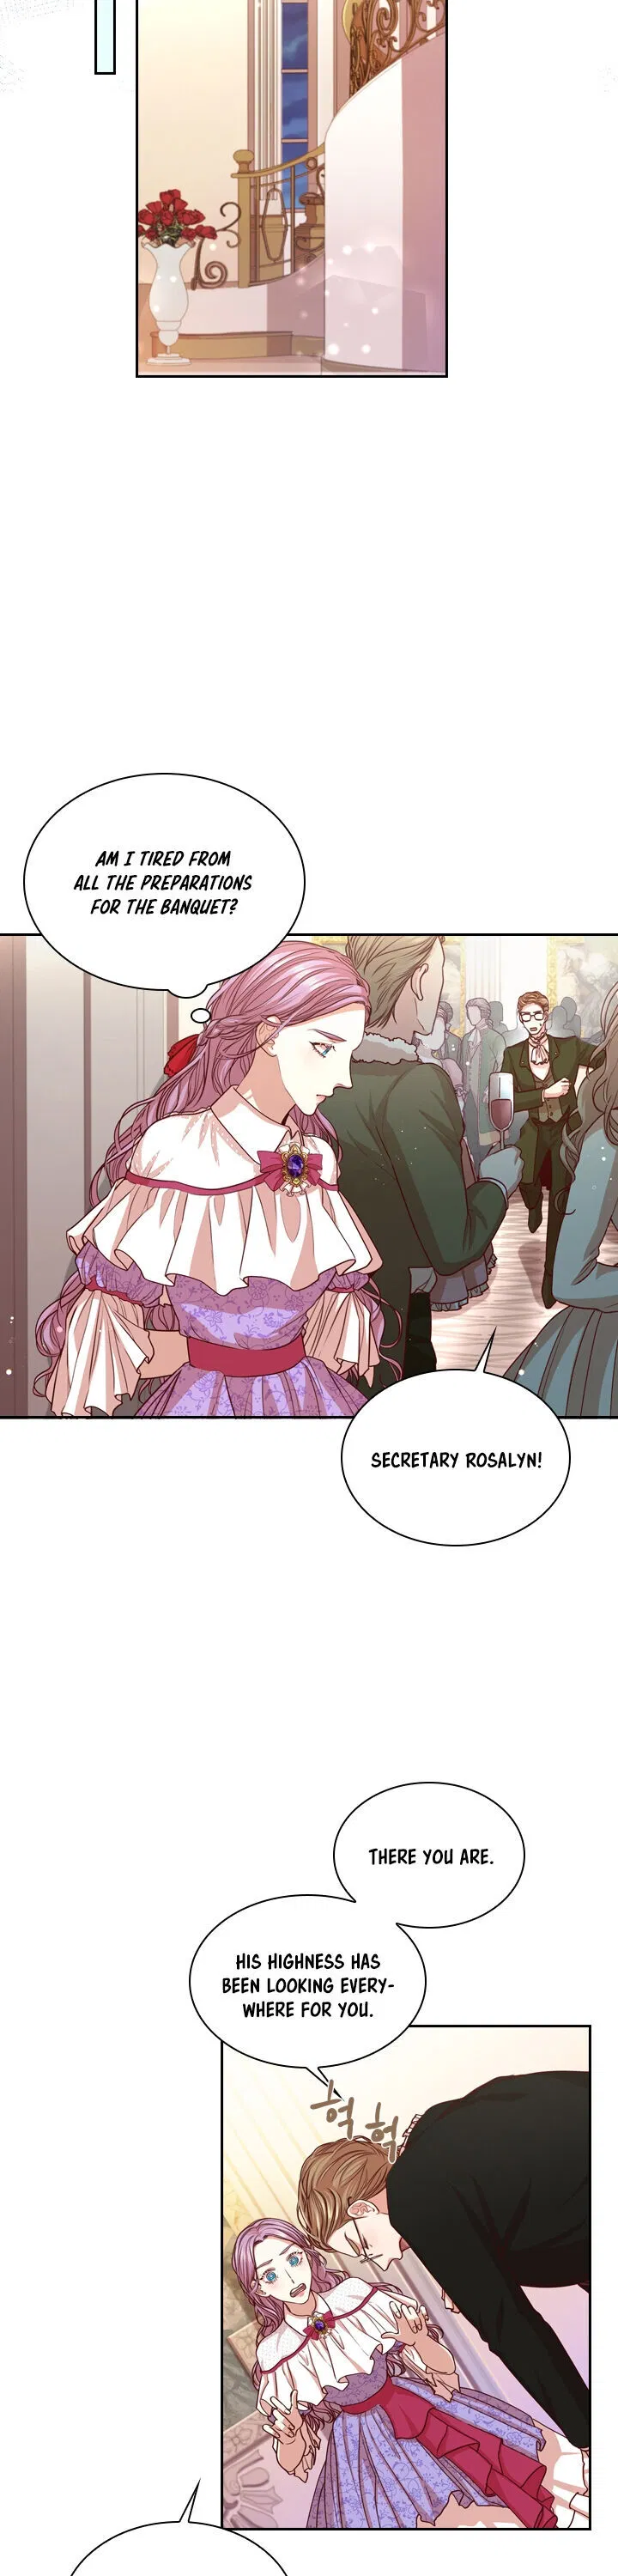 I Became the Tyrant’s Secretary Chapter 11 page 11